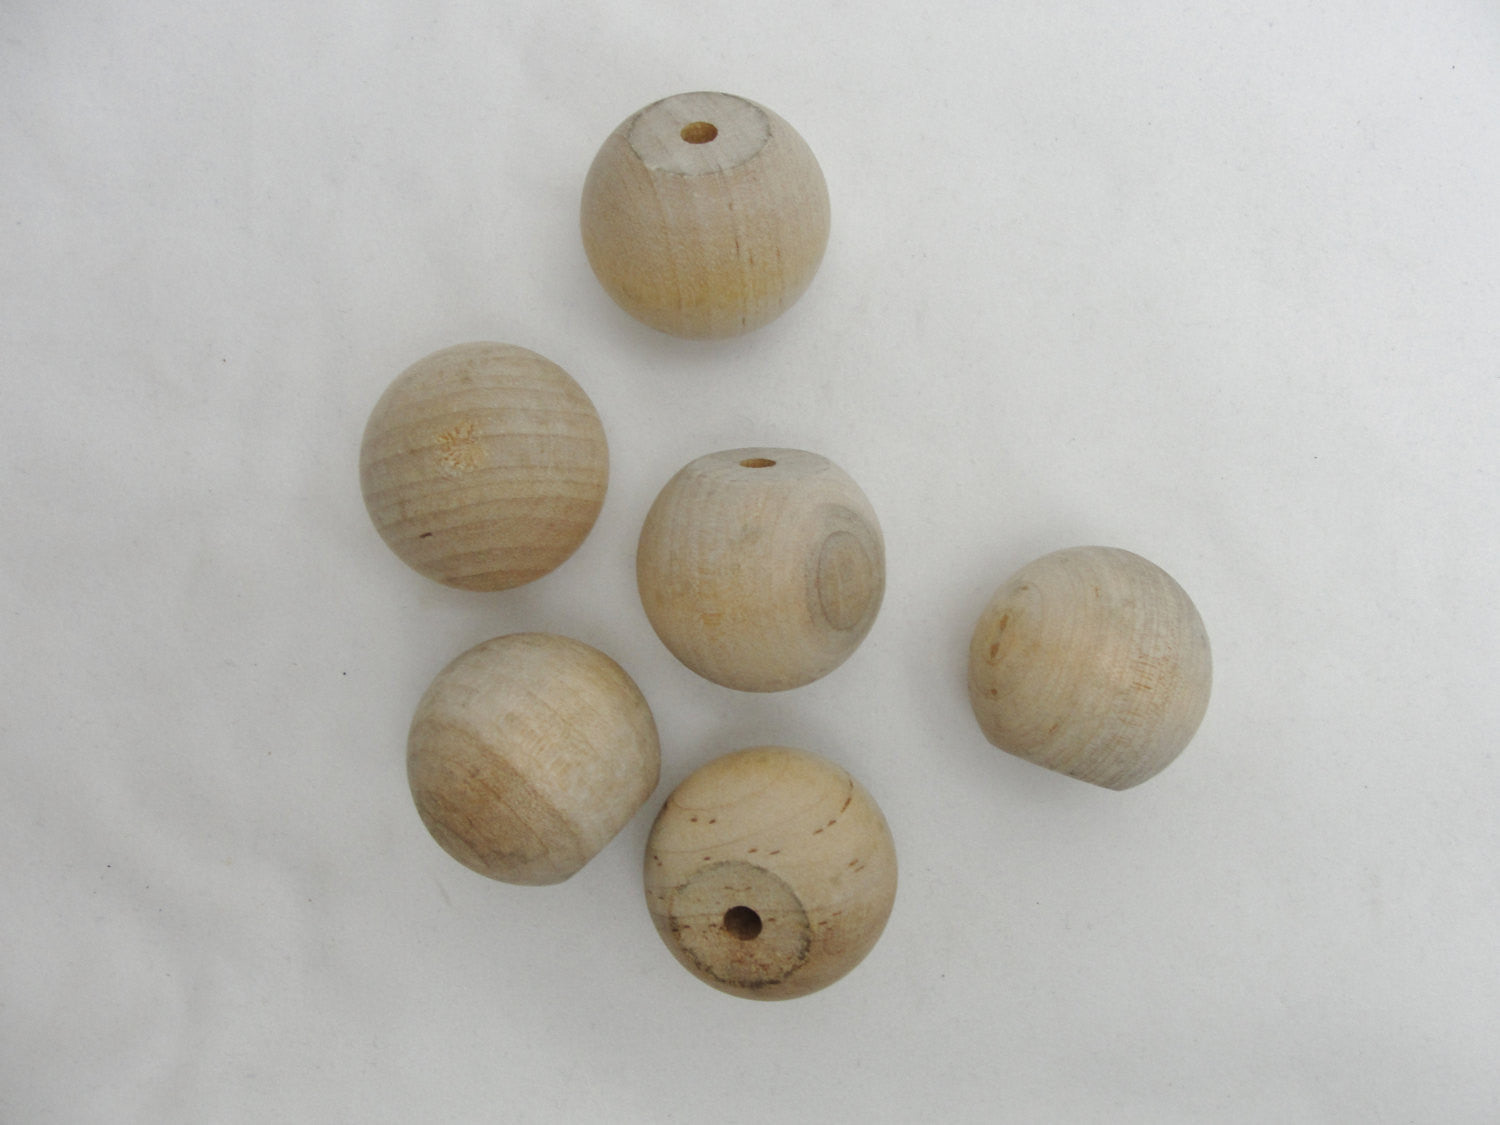 6 Wooden ball knob 1" (1 inch ball knob) solid wood - Wood parts - Craft Supply House